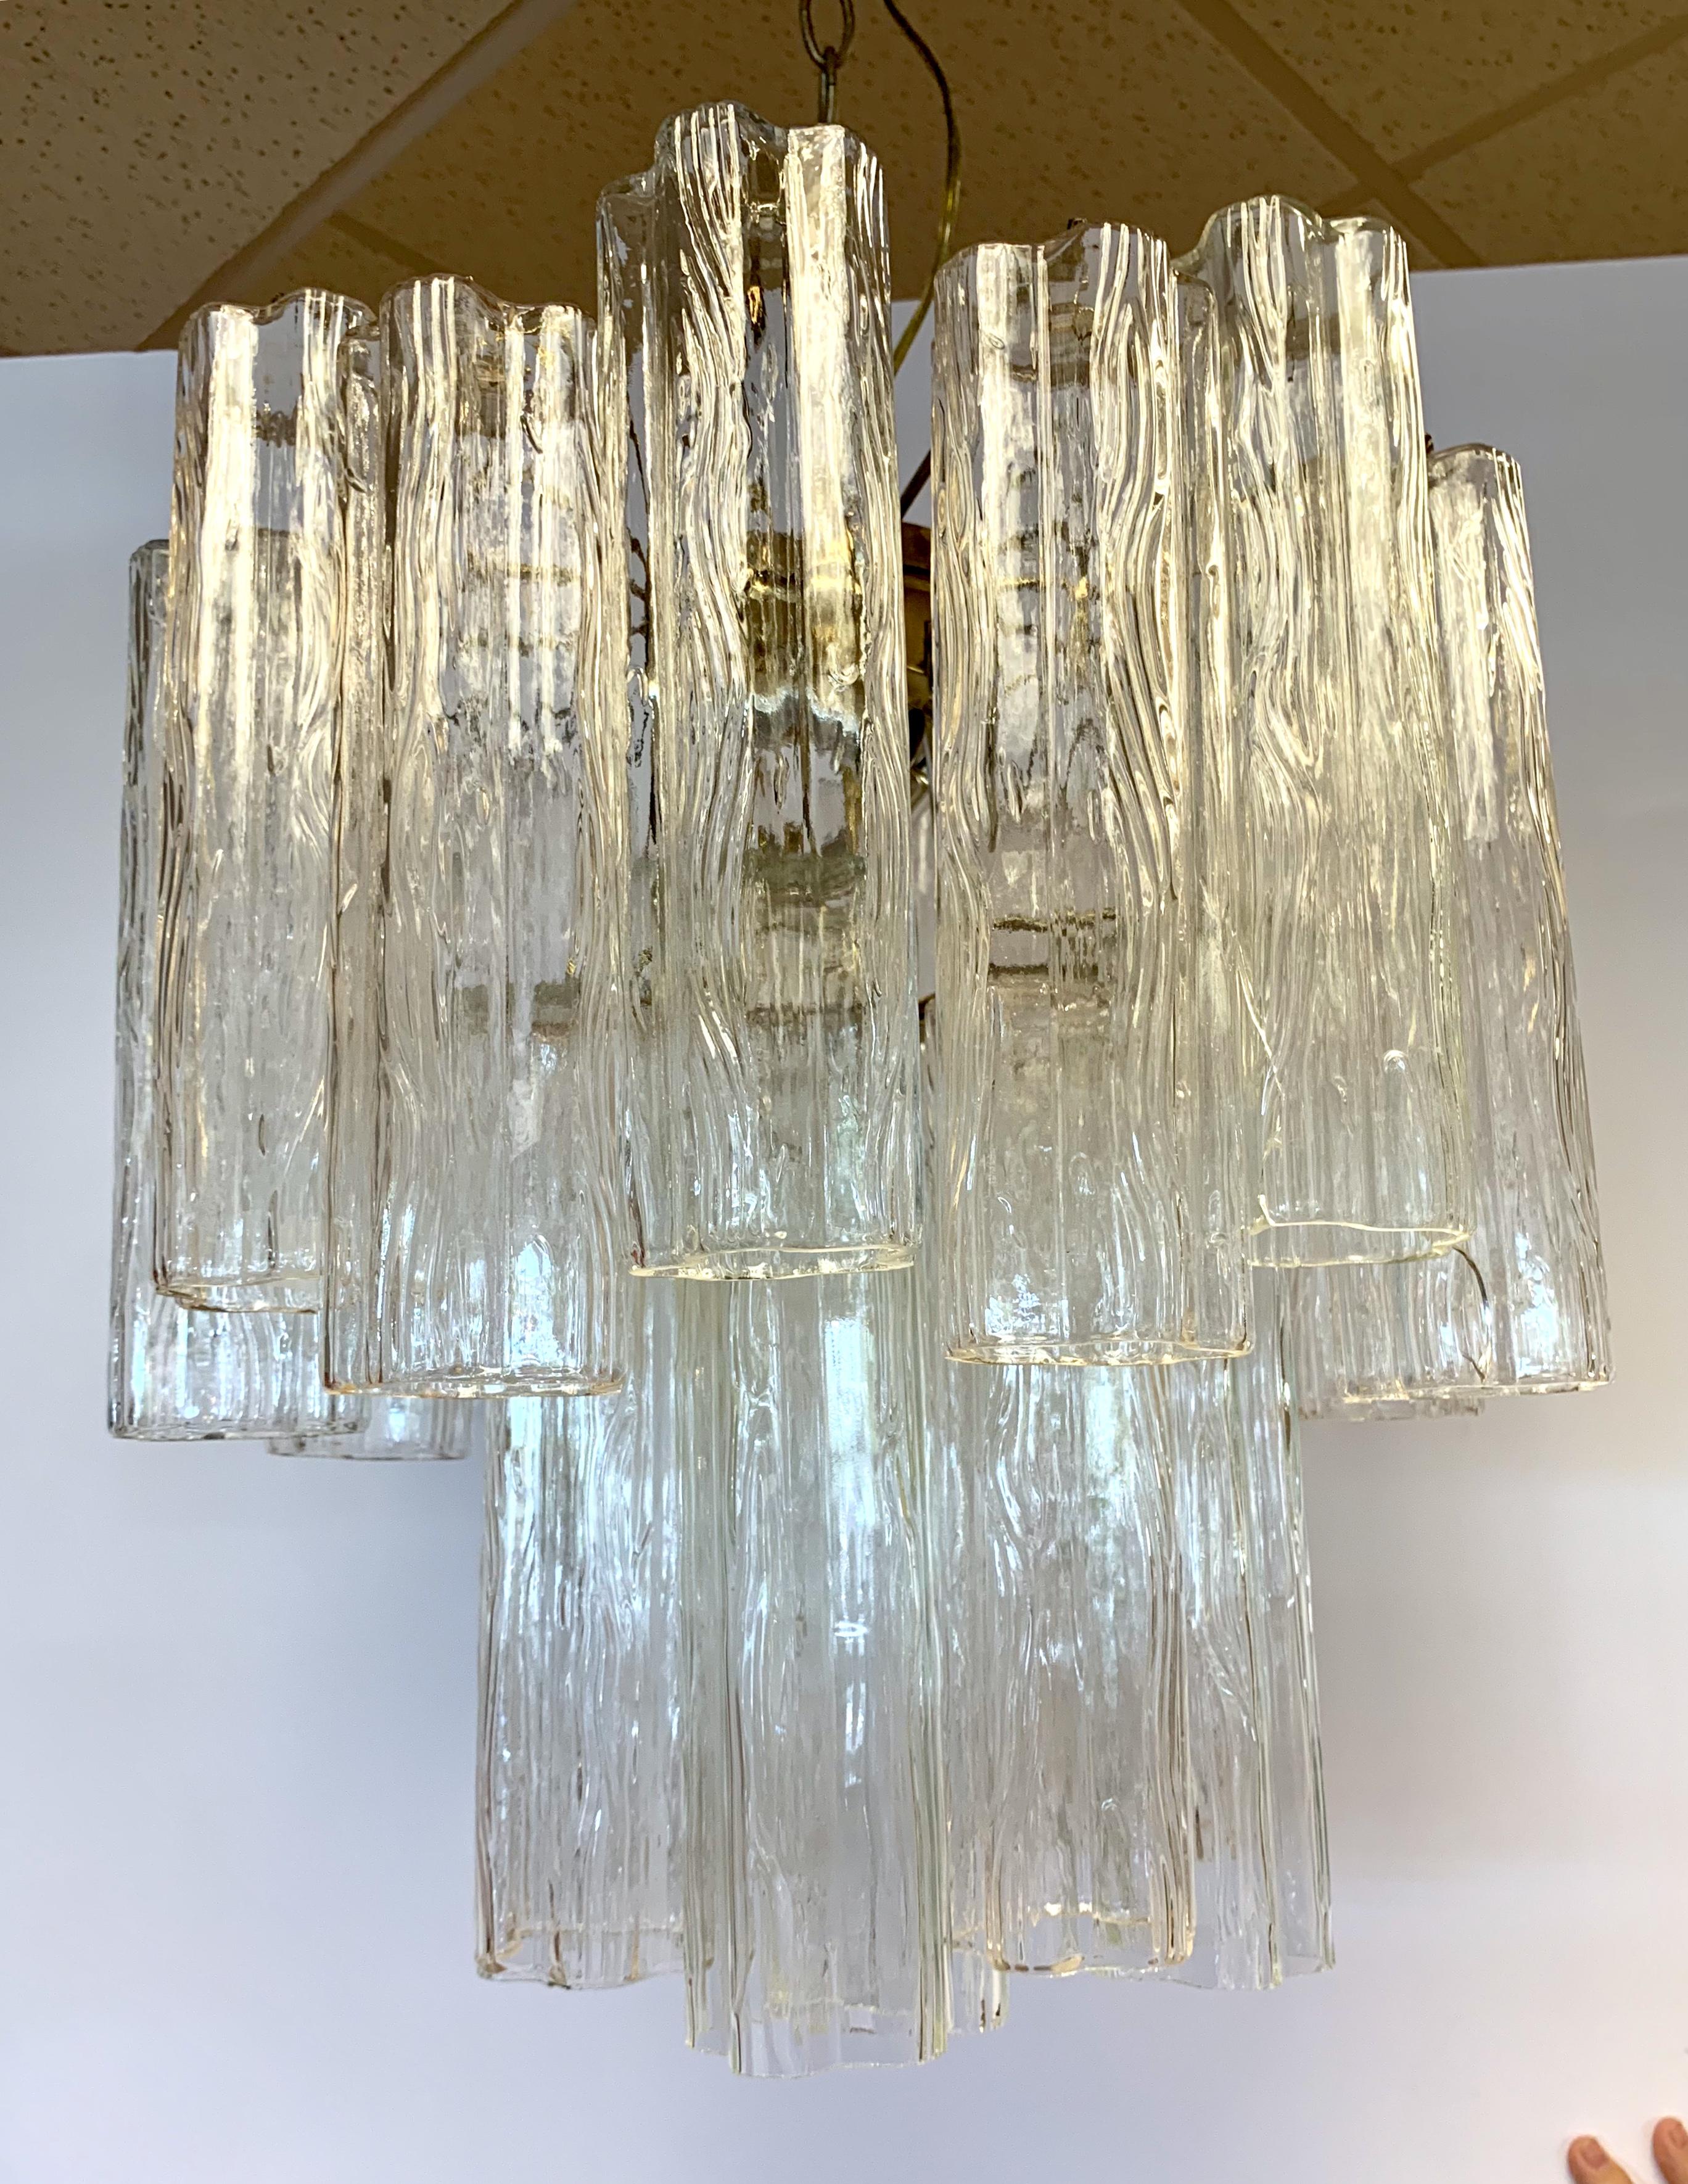 Mid-Century Modern venini glass chandelier is made of textured glass tubes that look like flowers when looked at from below. Made in Italy.
Wired for USA and in perfect working order.